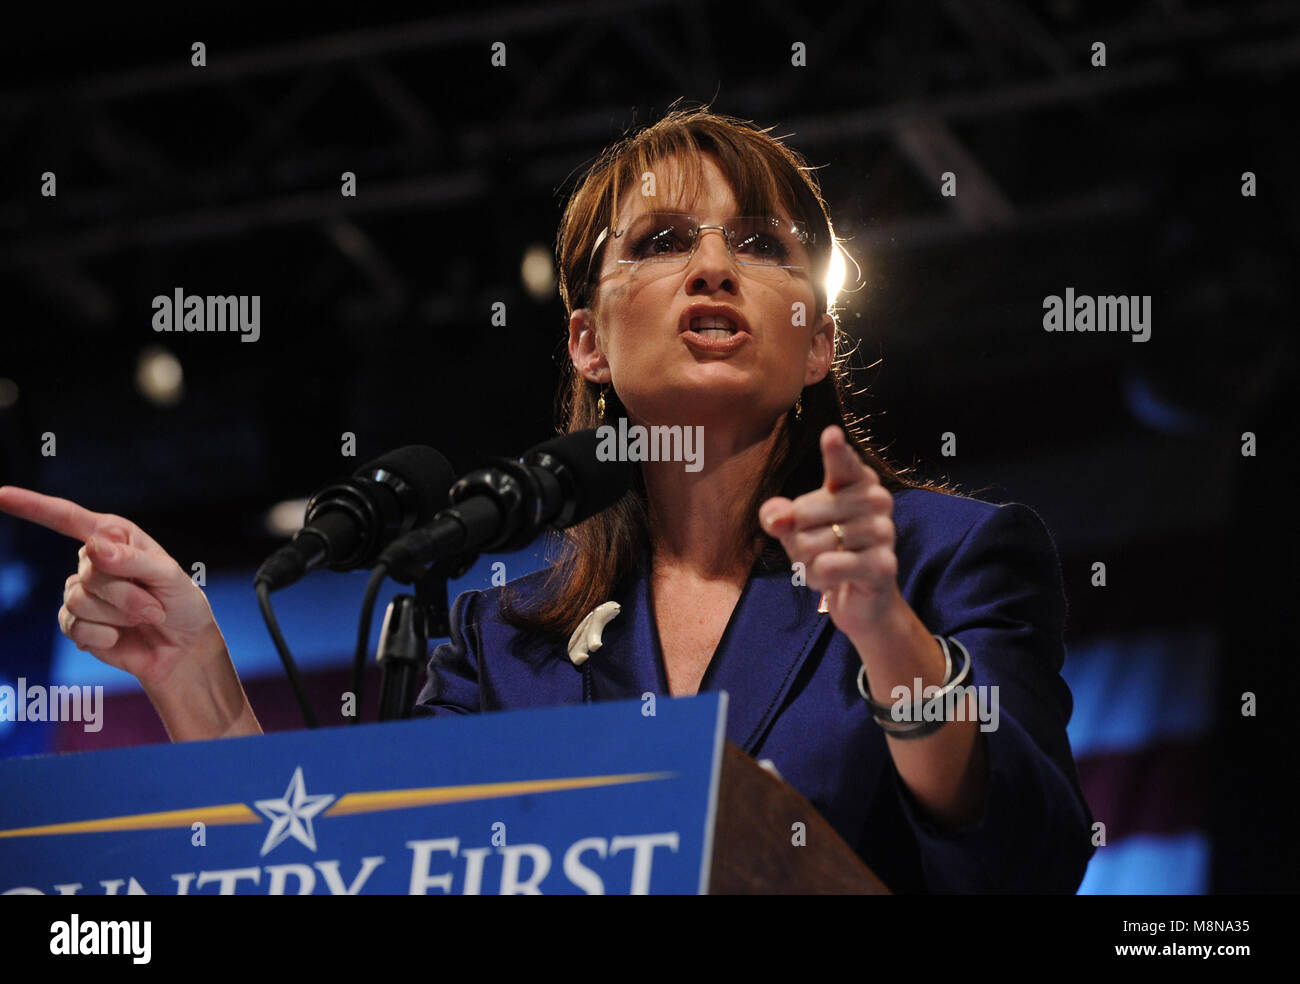 Sarah Palin addresses supporters at the Road to Victory Rally at the Riverfront Sports Complex in Scranton, Pennsylvania. October 14, 2008.  Credit: Dennis Van Tine/MediaPunch Stock Photo